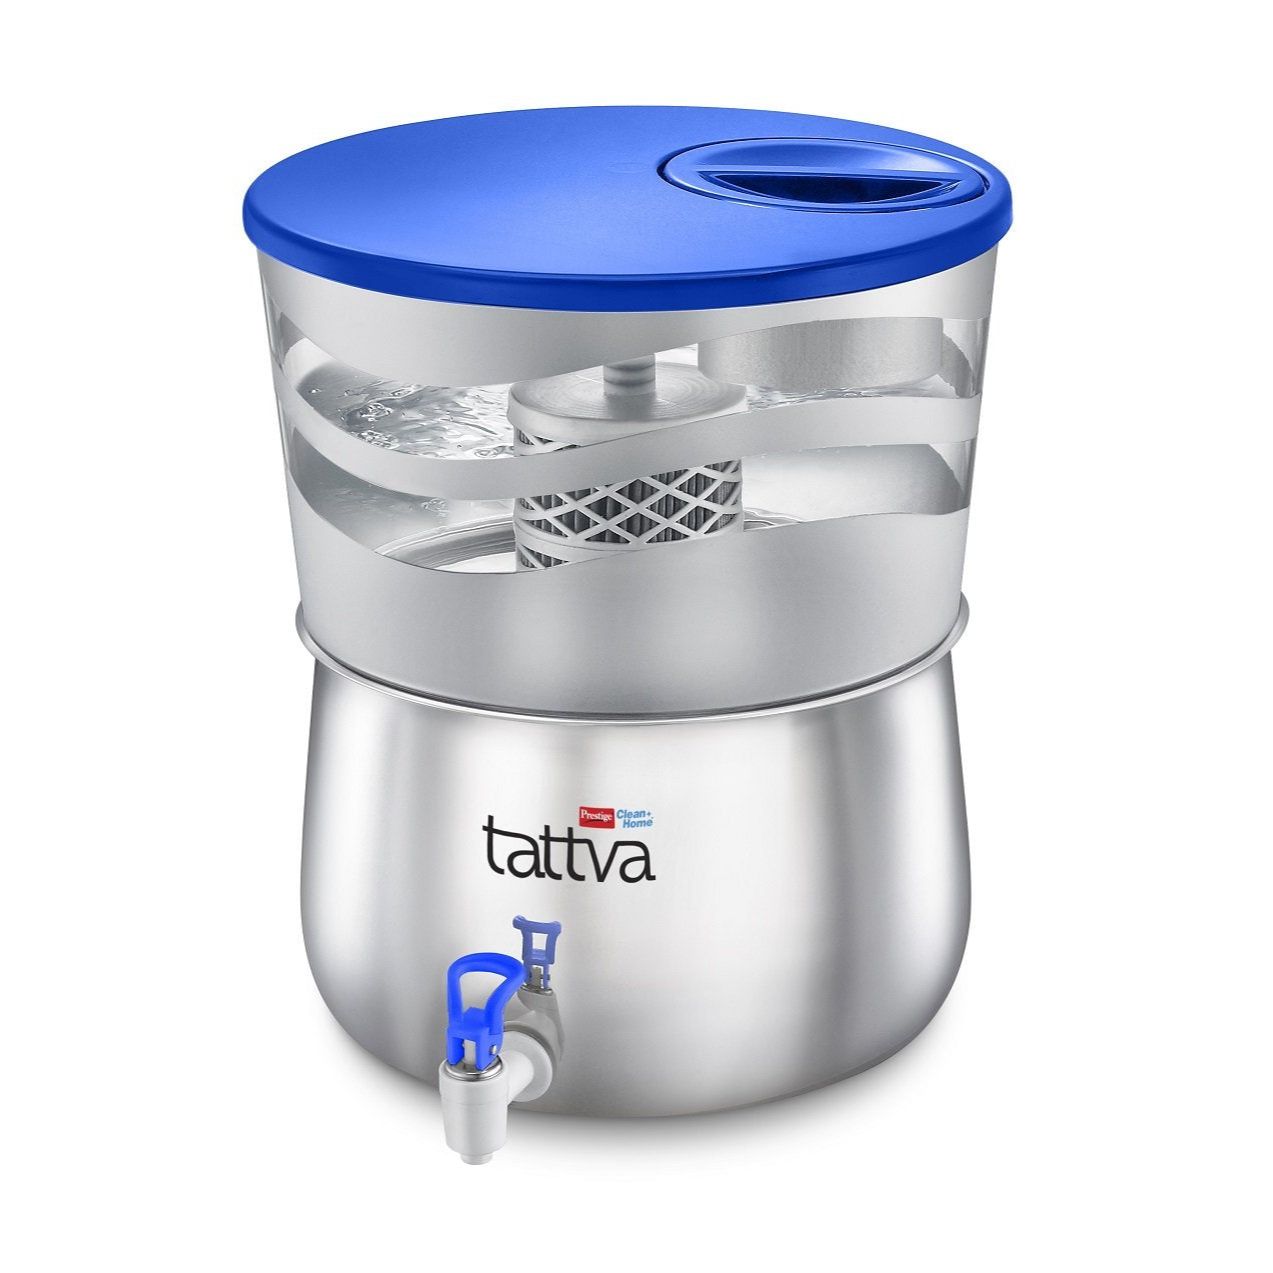 Prestige Clean Home Tattva 1.0 Stainless Steel Gravity Water Purifier, 16 Litres